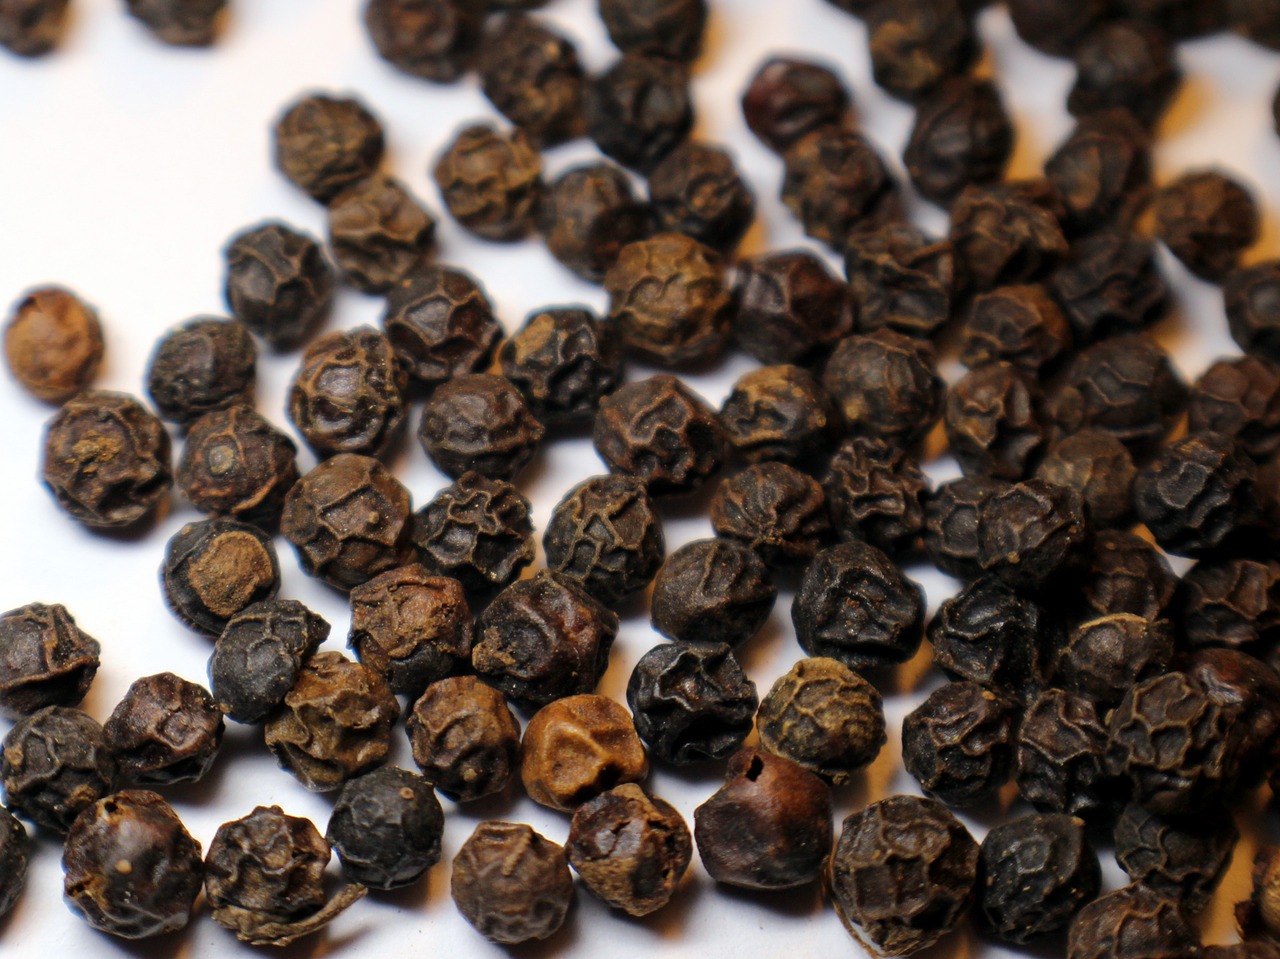 FIND OUT MORE ABOUT BLACK PEPPER